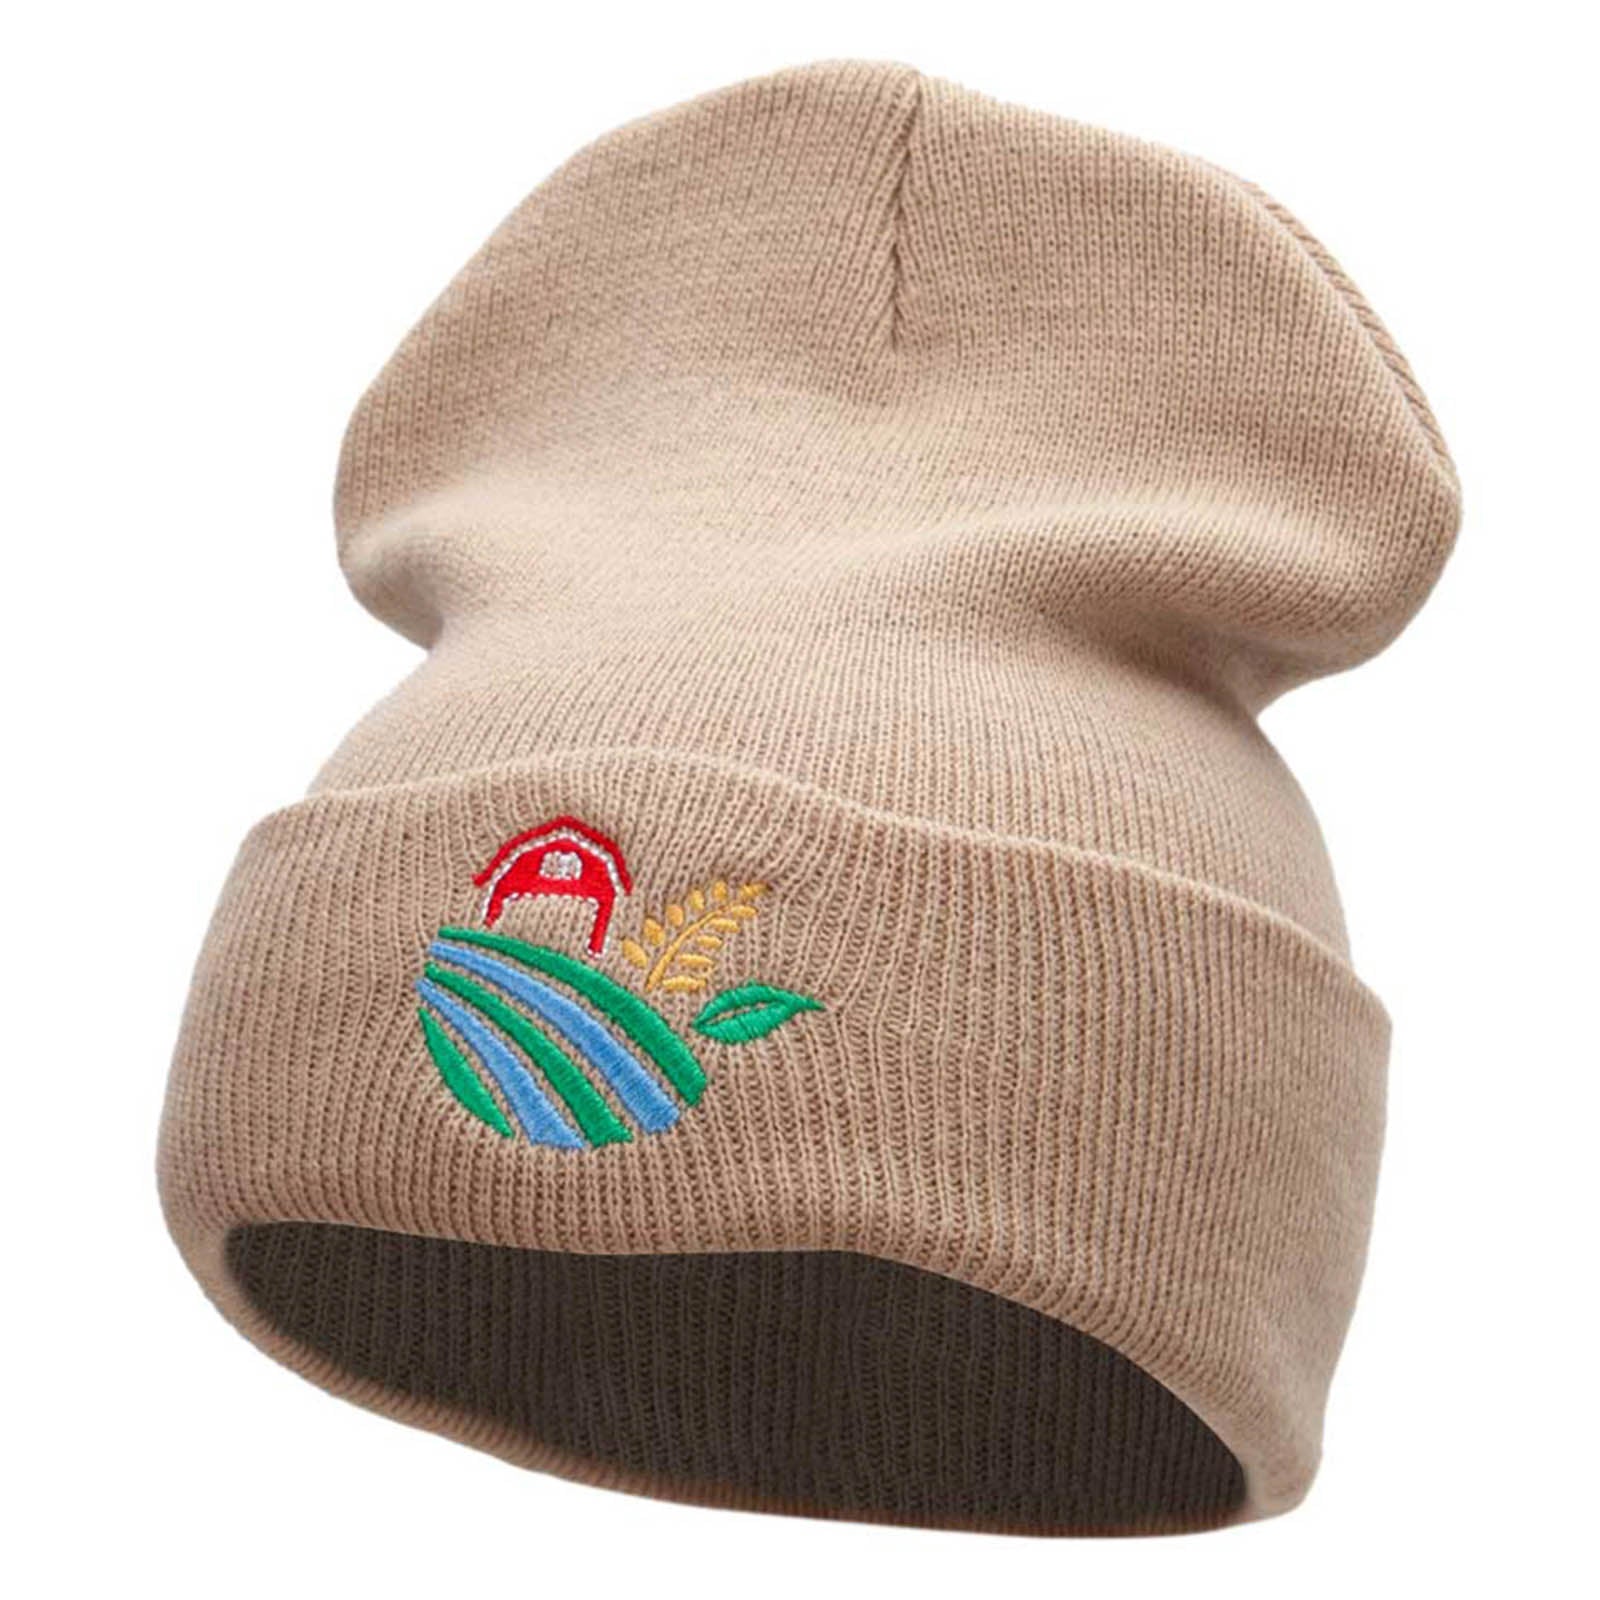 Farm Scape Embroidered 12 Inch Solid Long Beanie Made in USA - Khaki OSFM